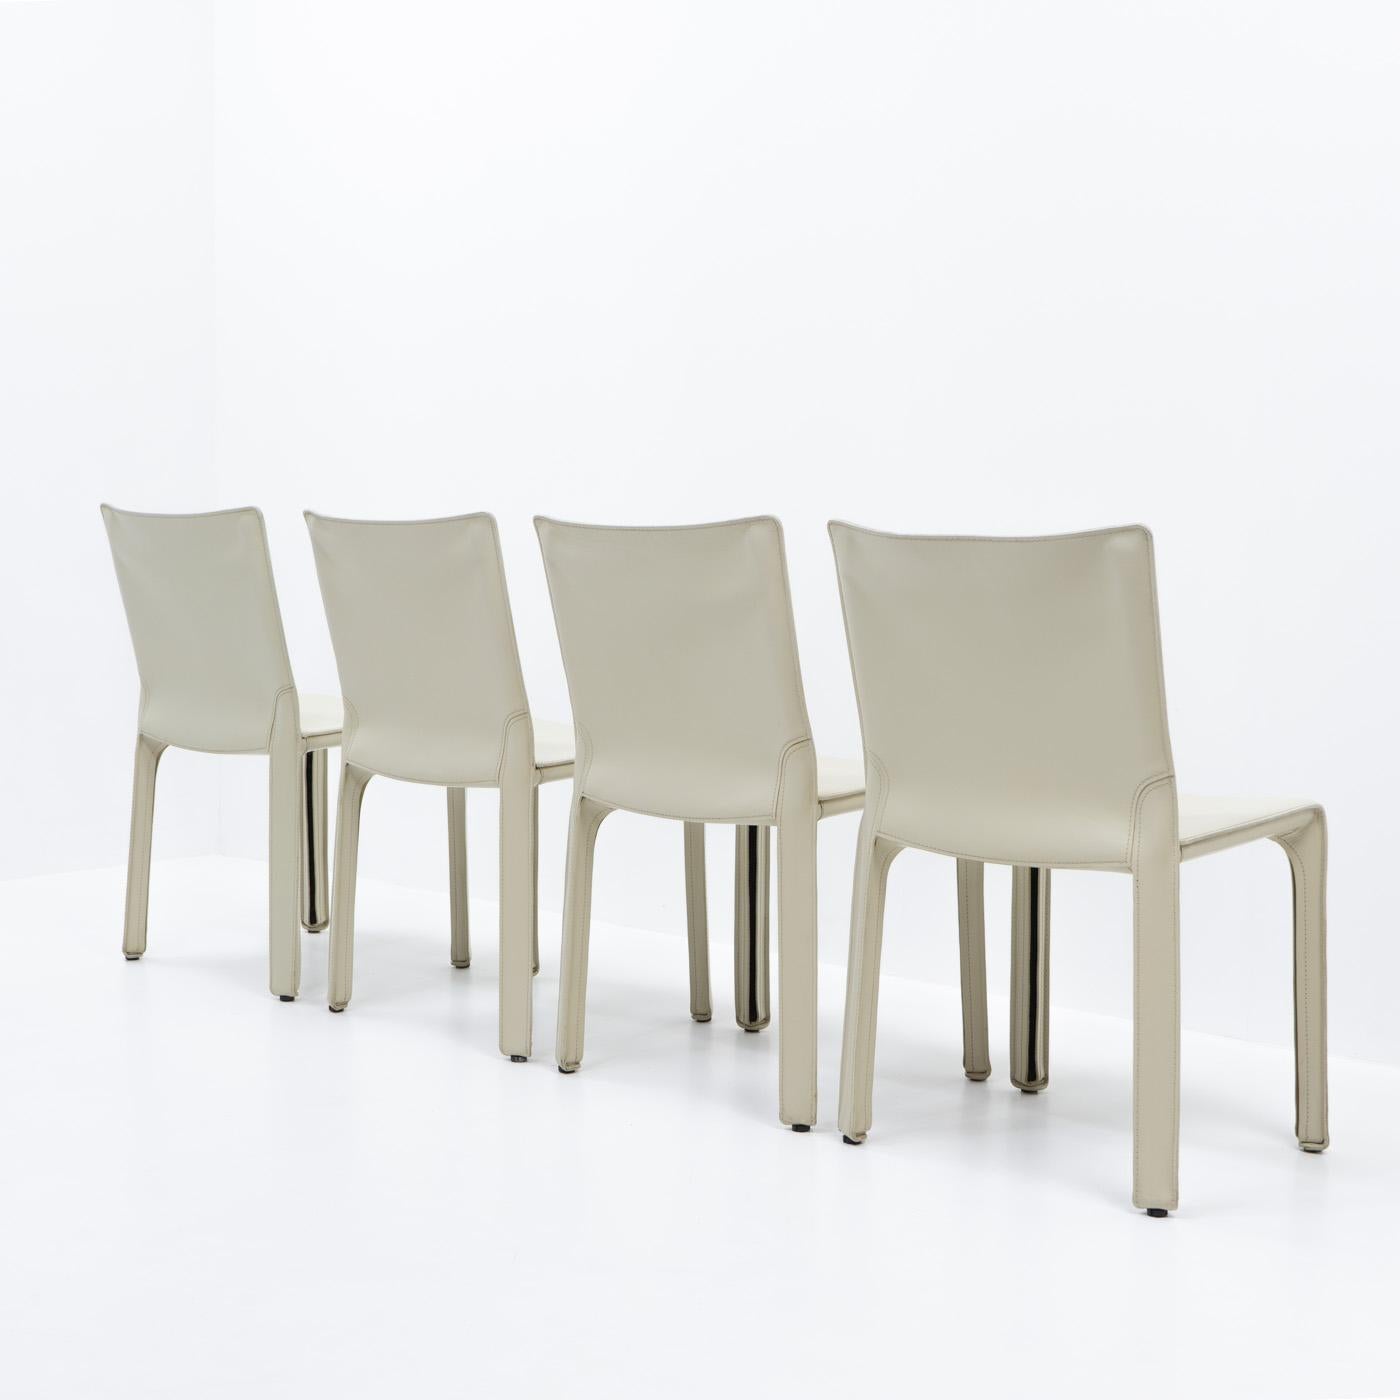 Cab 412 Chairs in Cream Leather by Mario Bellini for Cassina, Set of 4 In Good Condition For Sale In Renens, CH